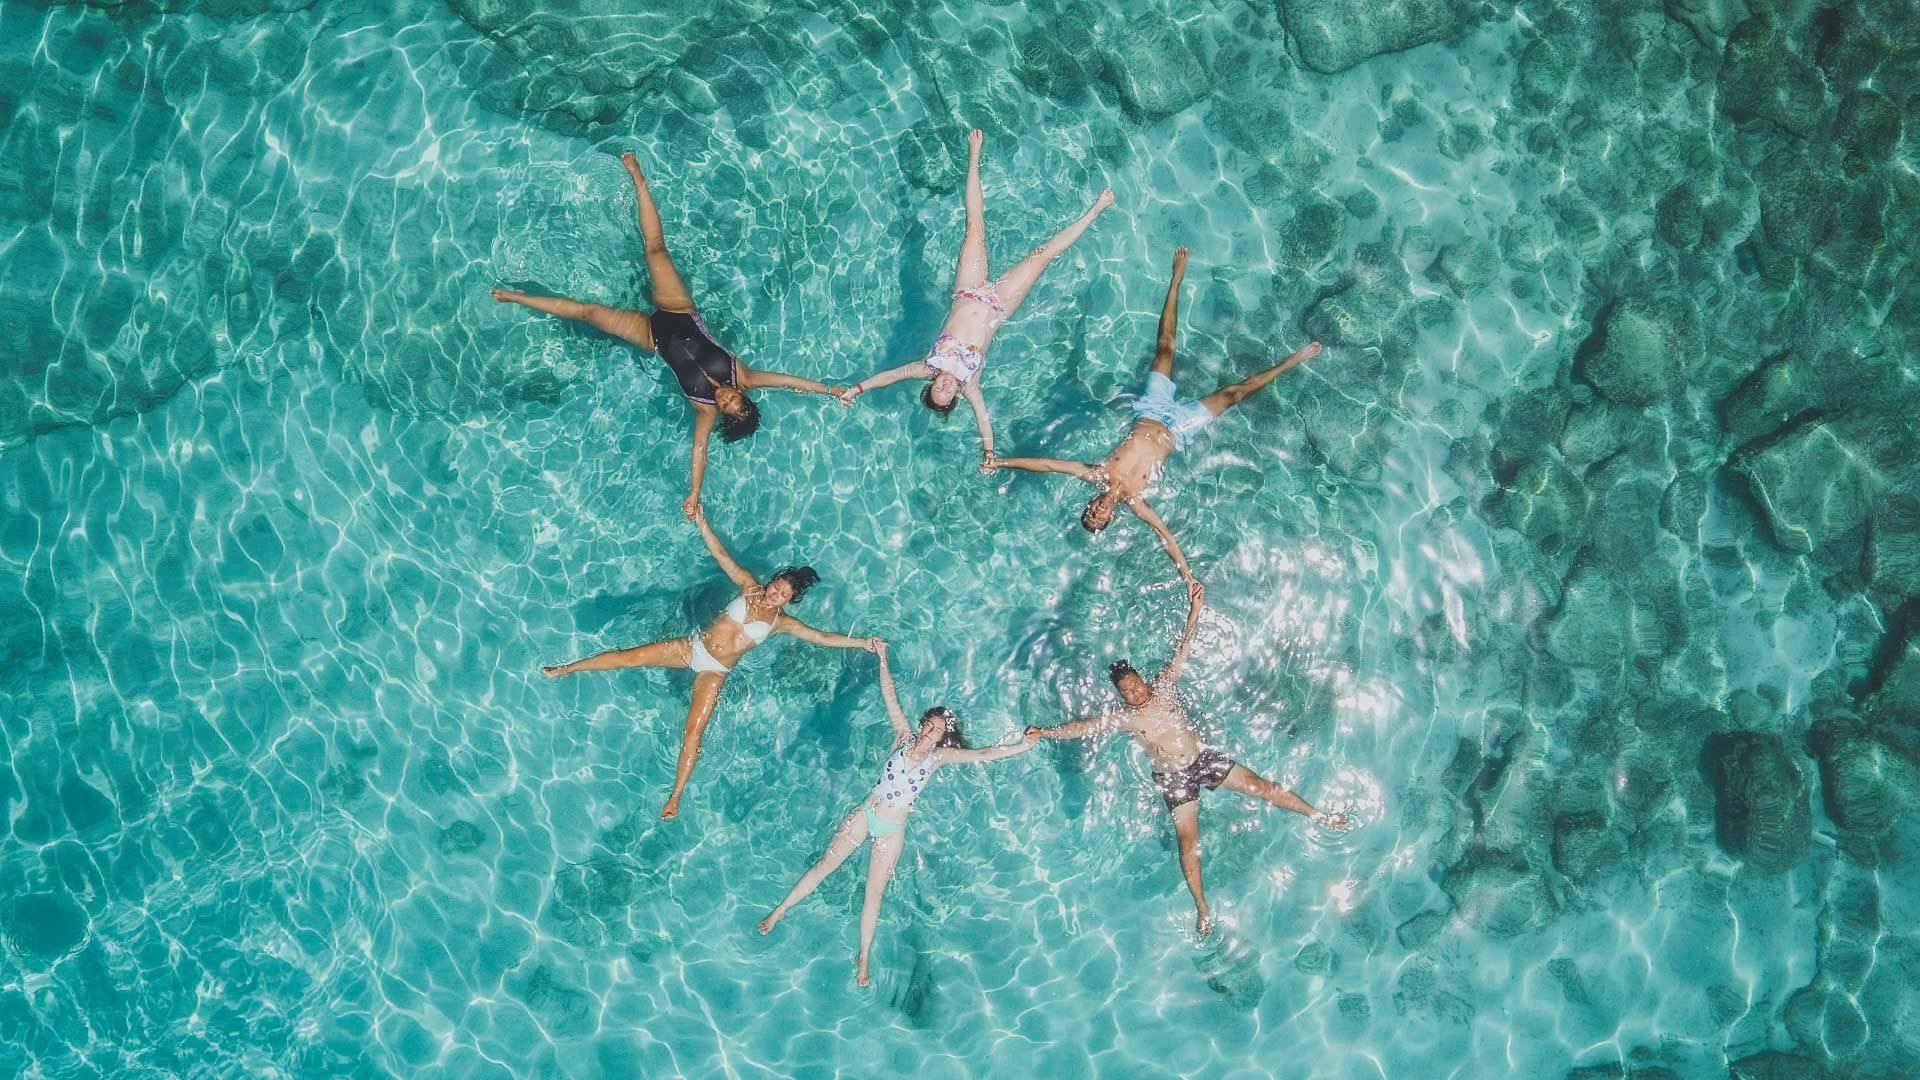 Group of people float in clear blue water in Greece